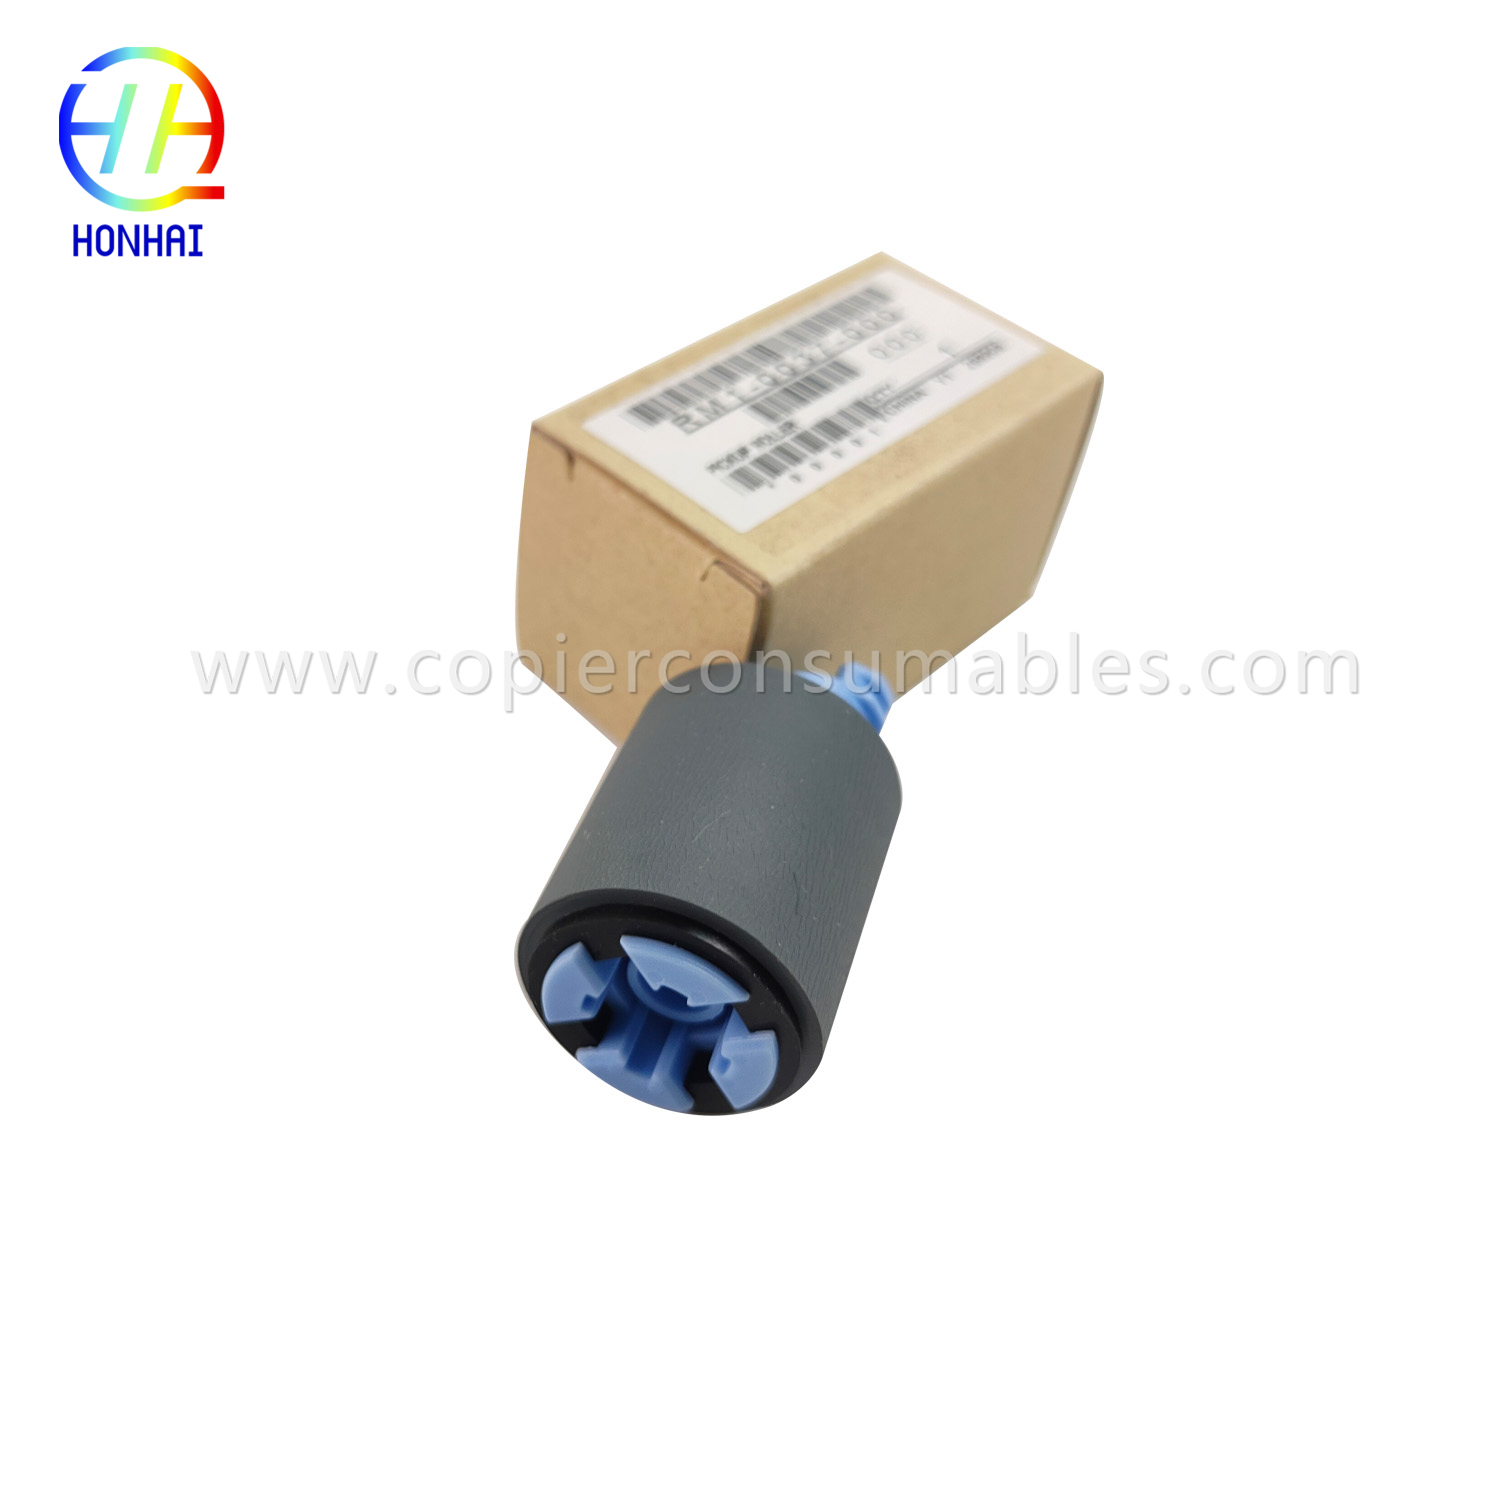 Feed  Separation Roller for HP CP3525 4200 4250 4300 4345 4350 5200 p4014 p4015 p4515 CM6030 M601 M602 RM1-0037-000(3).jpg-1 拷贝